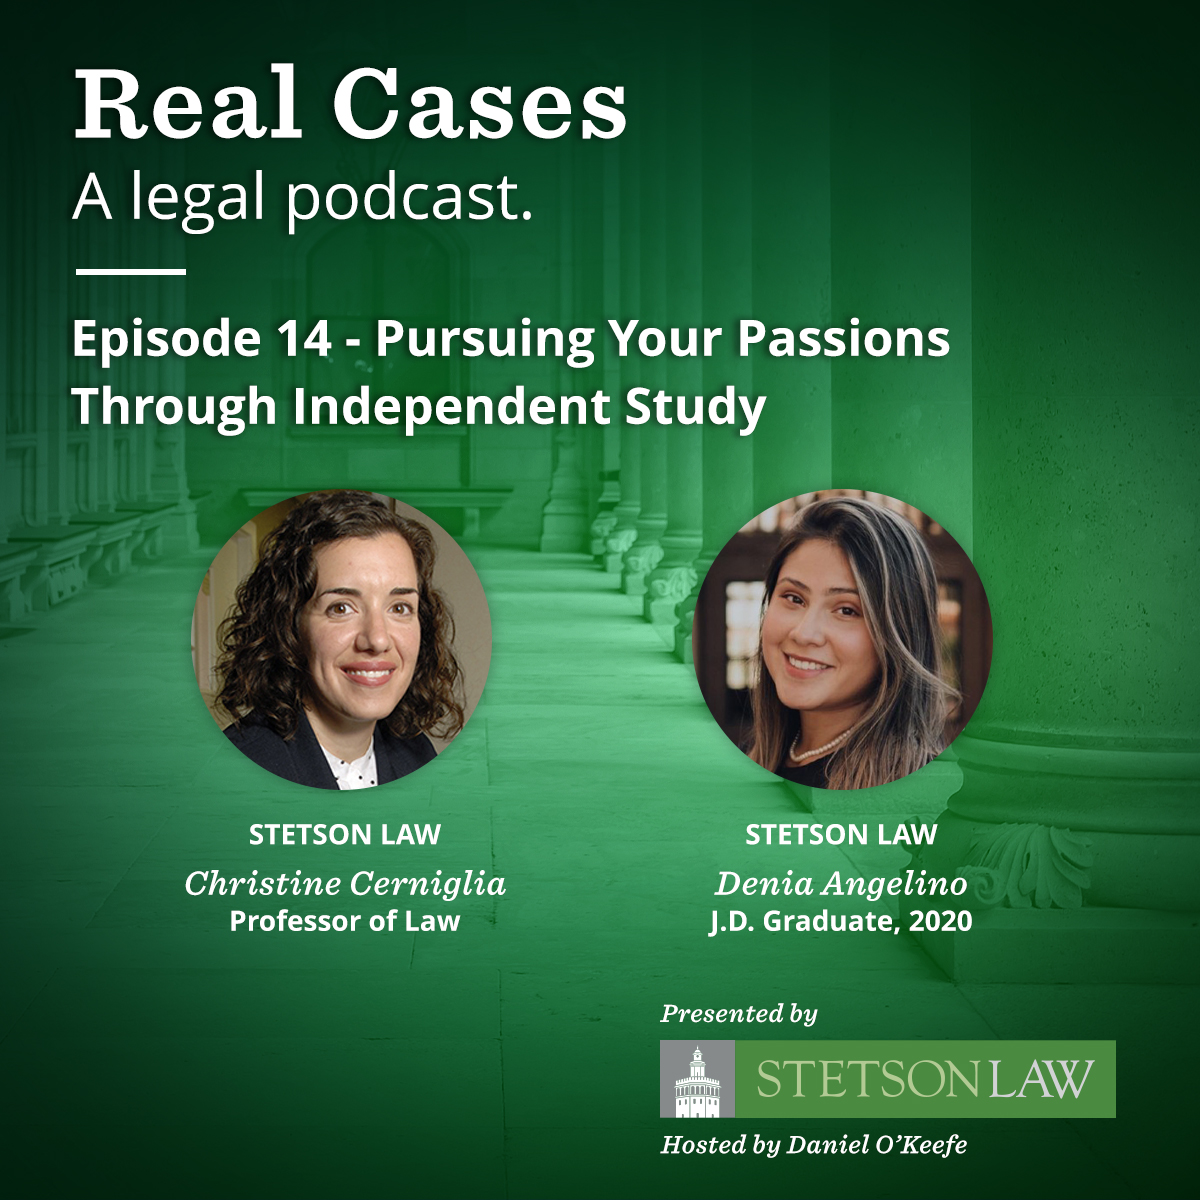 Real Cases - a legal podcast. Episode 14 - Pursuing Your Passions Through Independent Study - Christine Cerniglia & Denia Angelino